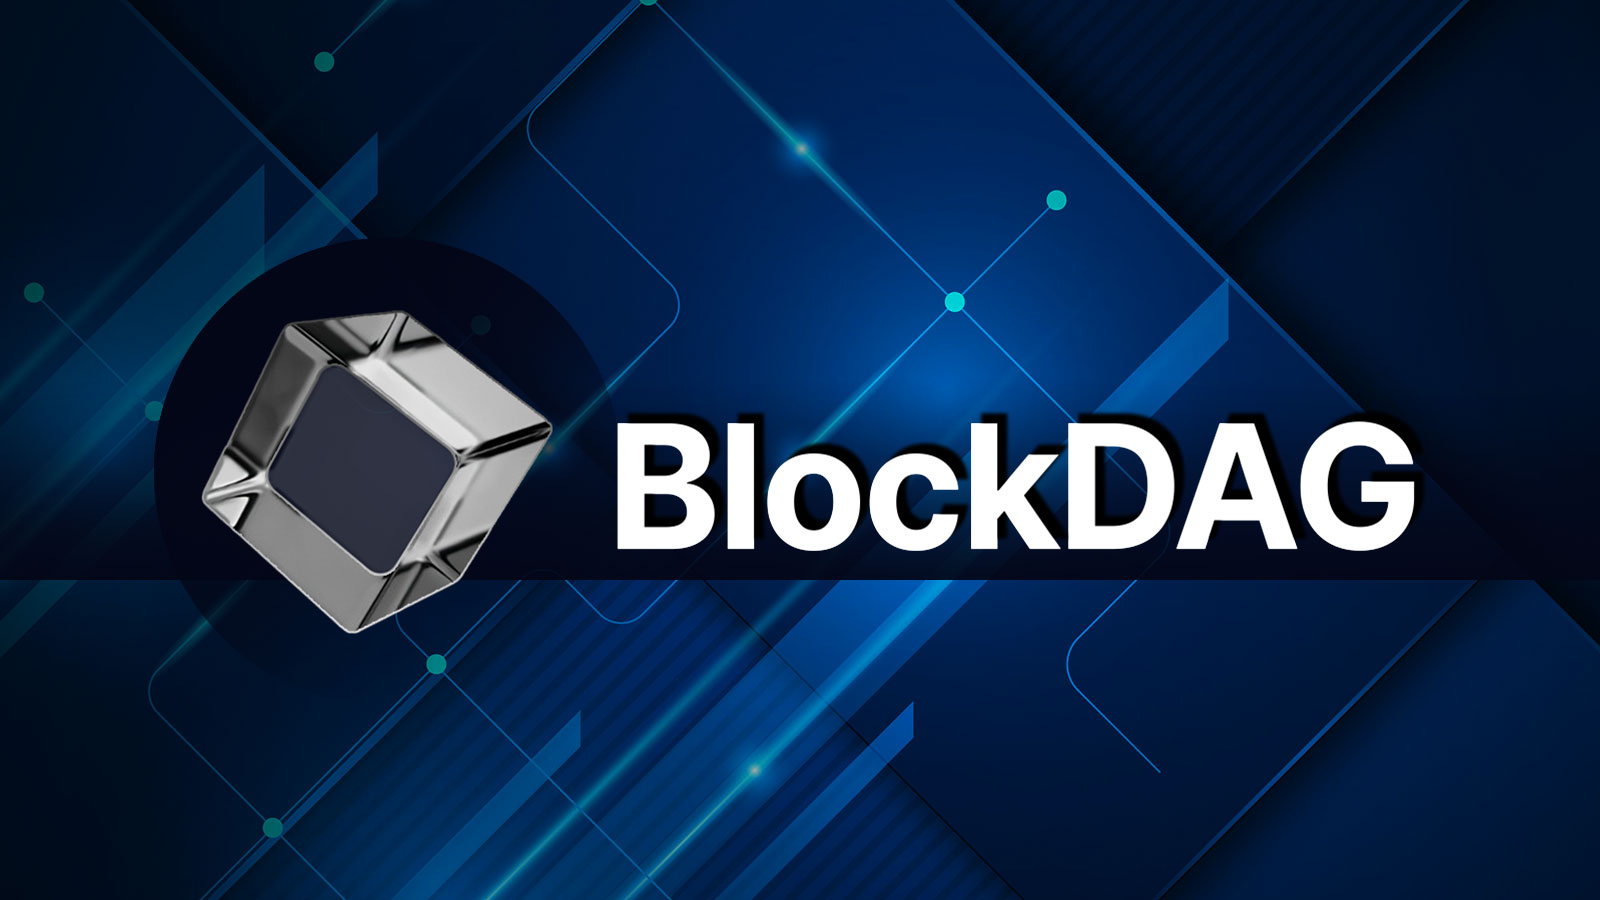 BlockDAG (BDAG) Token Release in Focus for Altcoiners in March as Kaspa (KAS) Supporters Ready for Network Upgrades